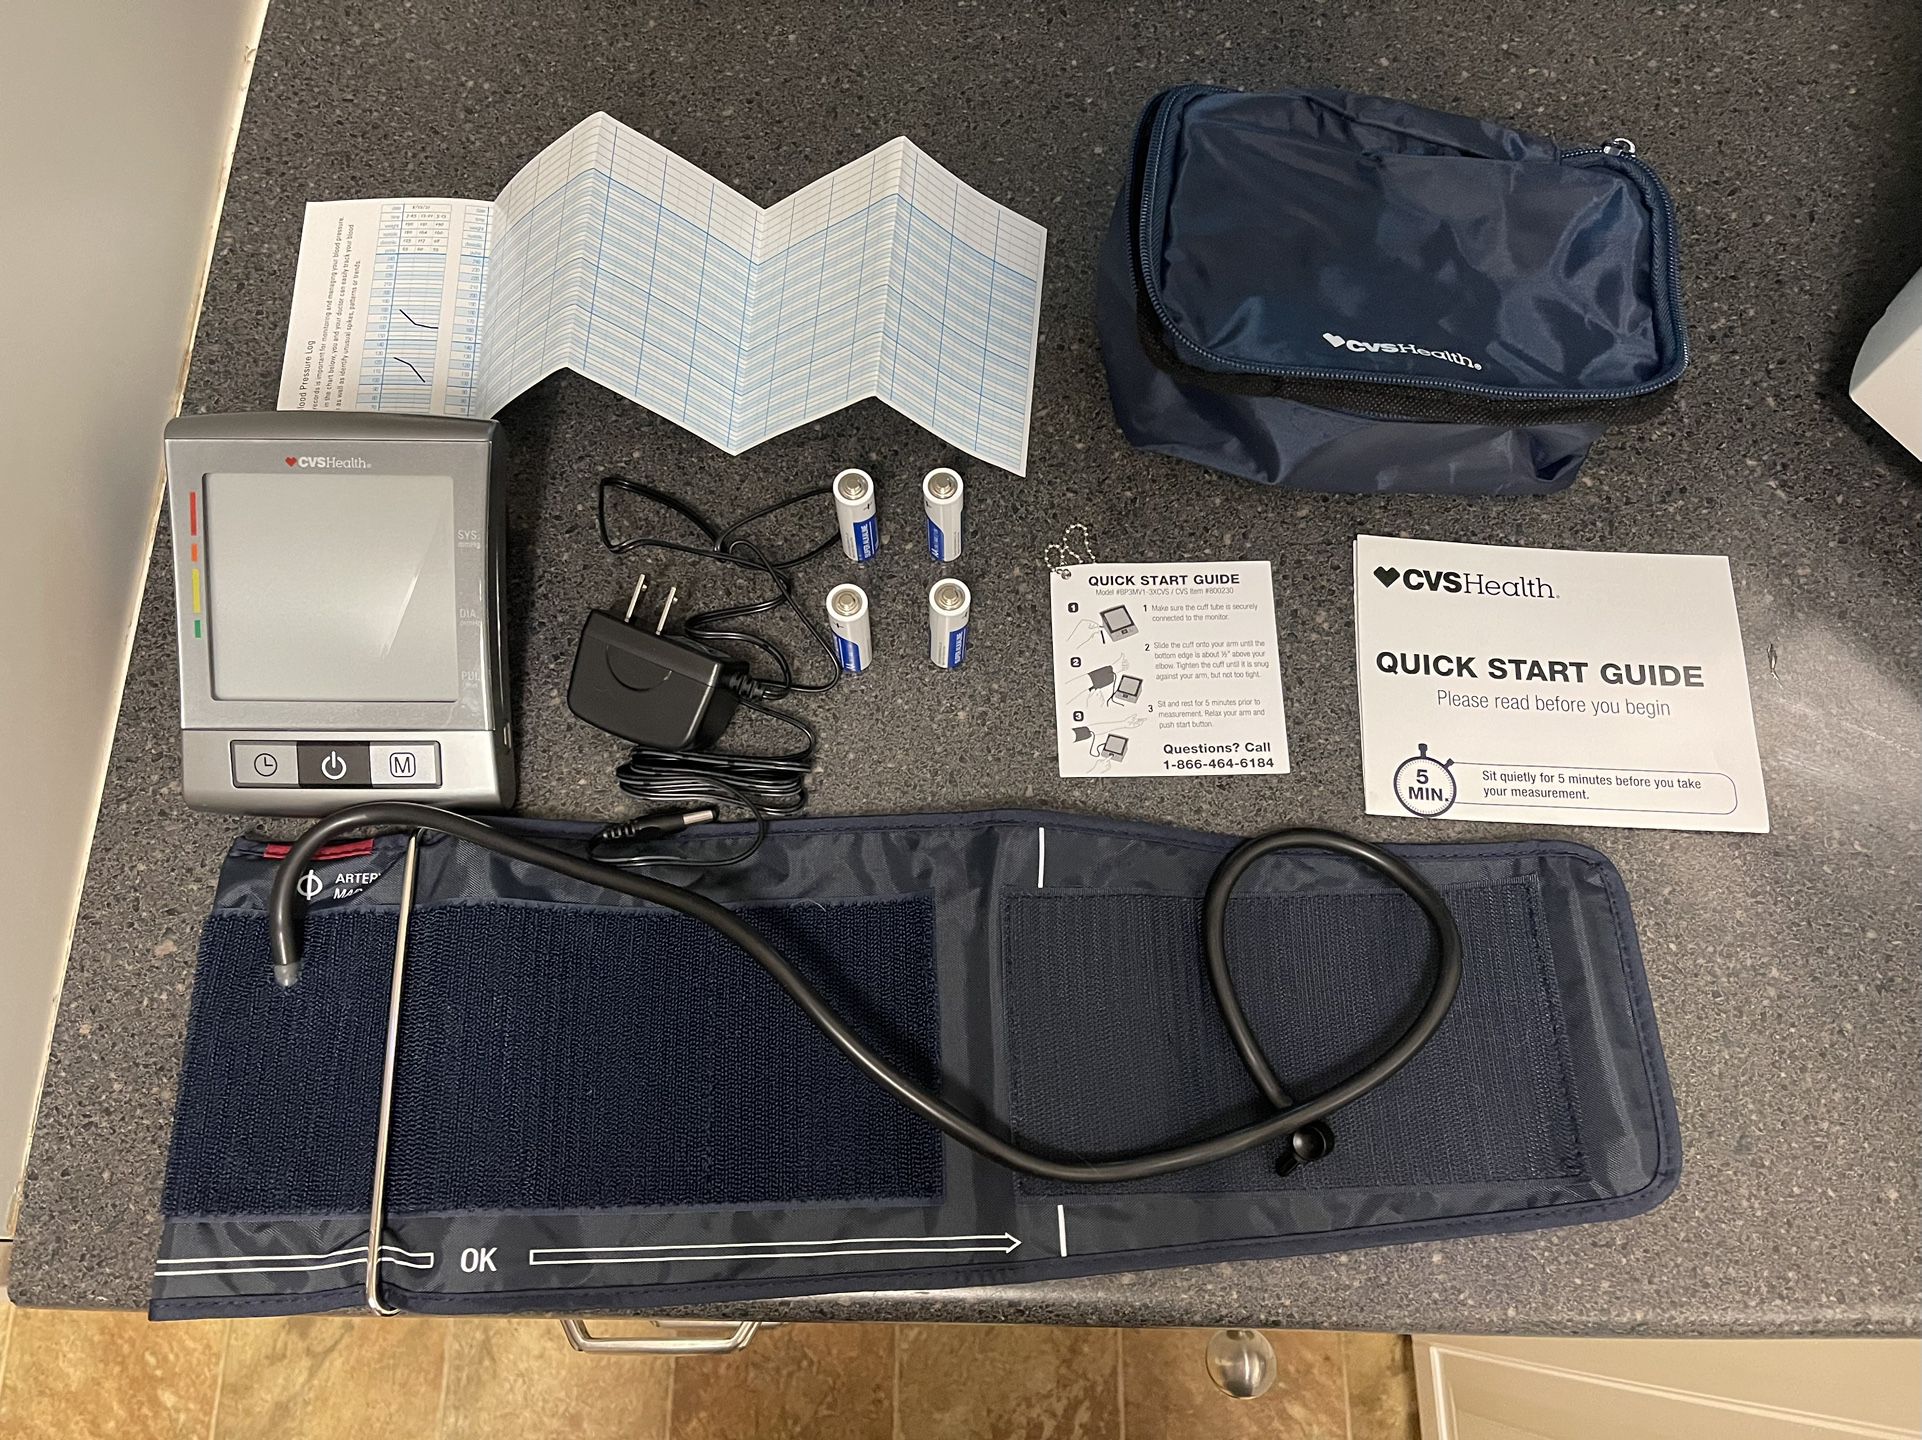 Microlife Bluetooth Blood Pressure Monitor for Sale in San Diego, CA -  OfferUp